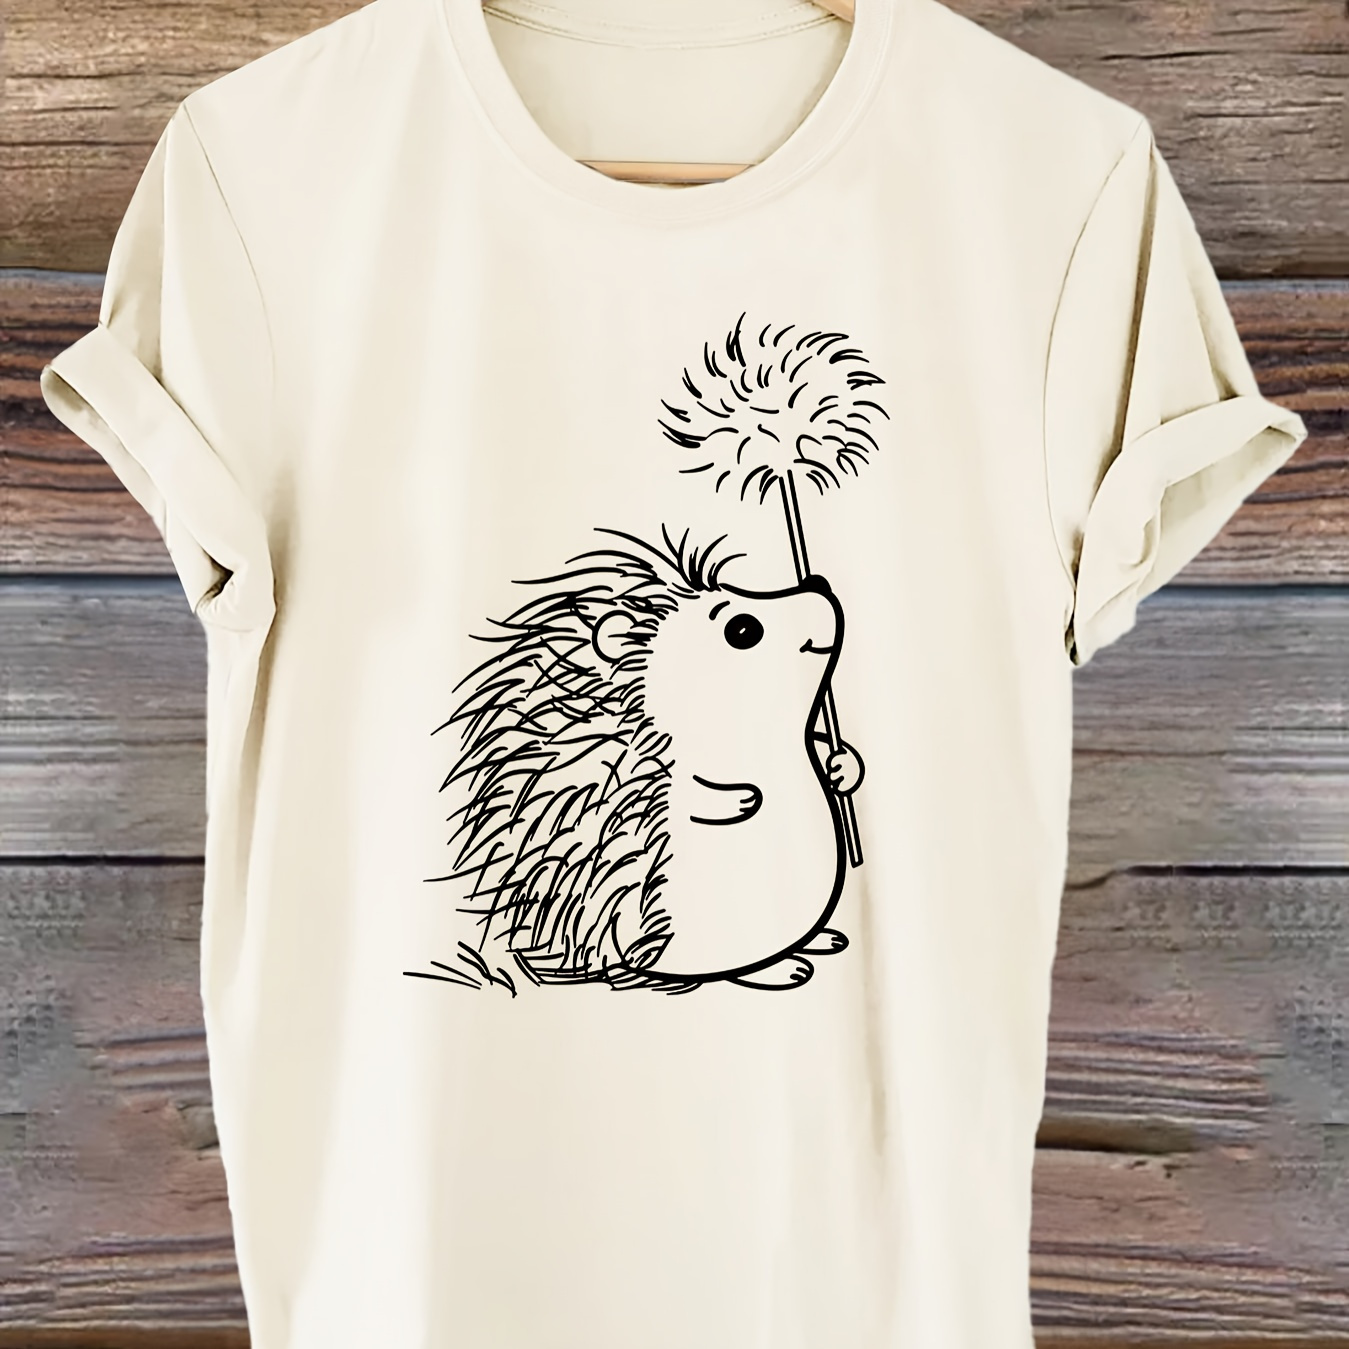 

Hedgehog Print T-shirt, Short Sleeve Crew Neck Casual Top For Summer & Spring, Women's Clothing